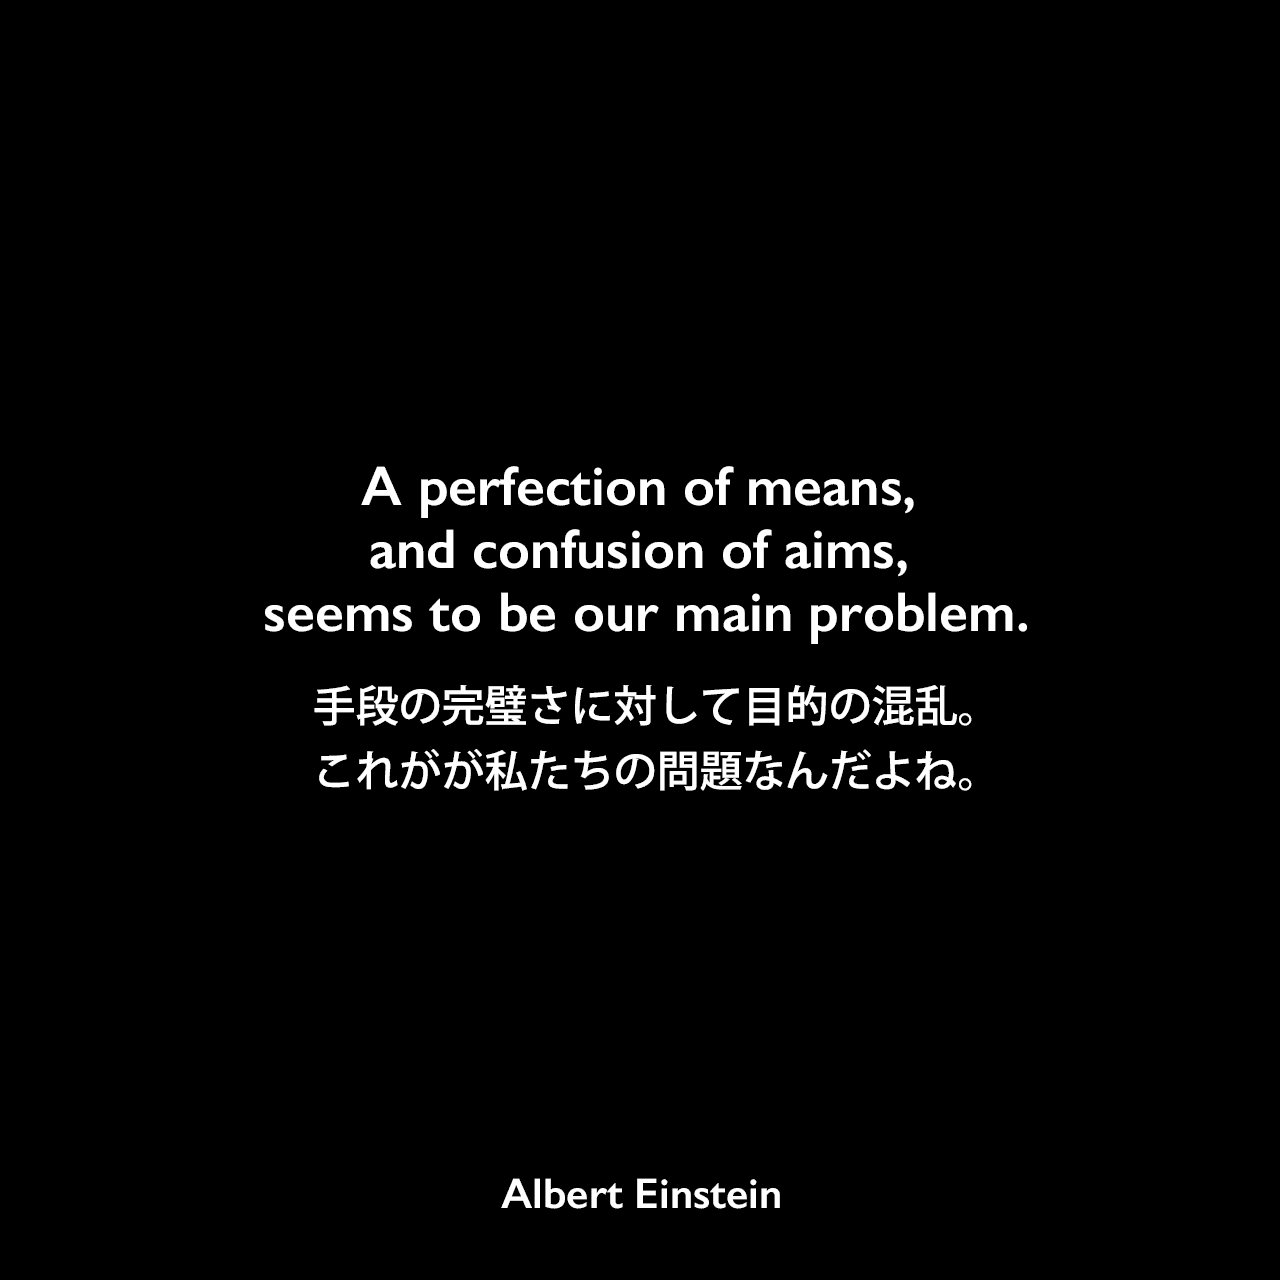 A perfection of means, and confusion of aims, seems to be our main problem.手段の完璧さに対して目的の混乱。これがが私たちの問題なんだよね。Albert Einstein